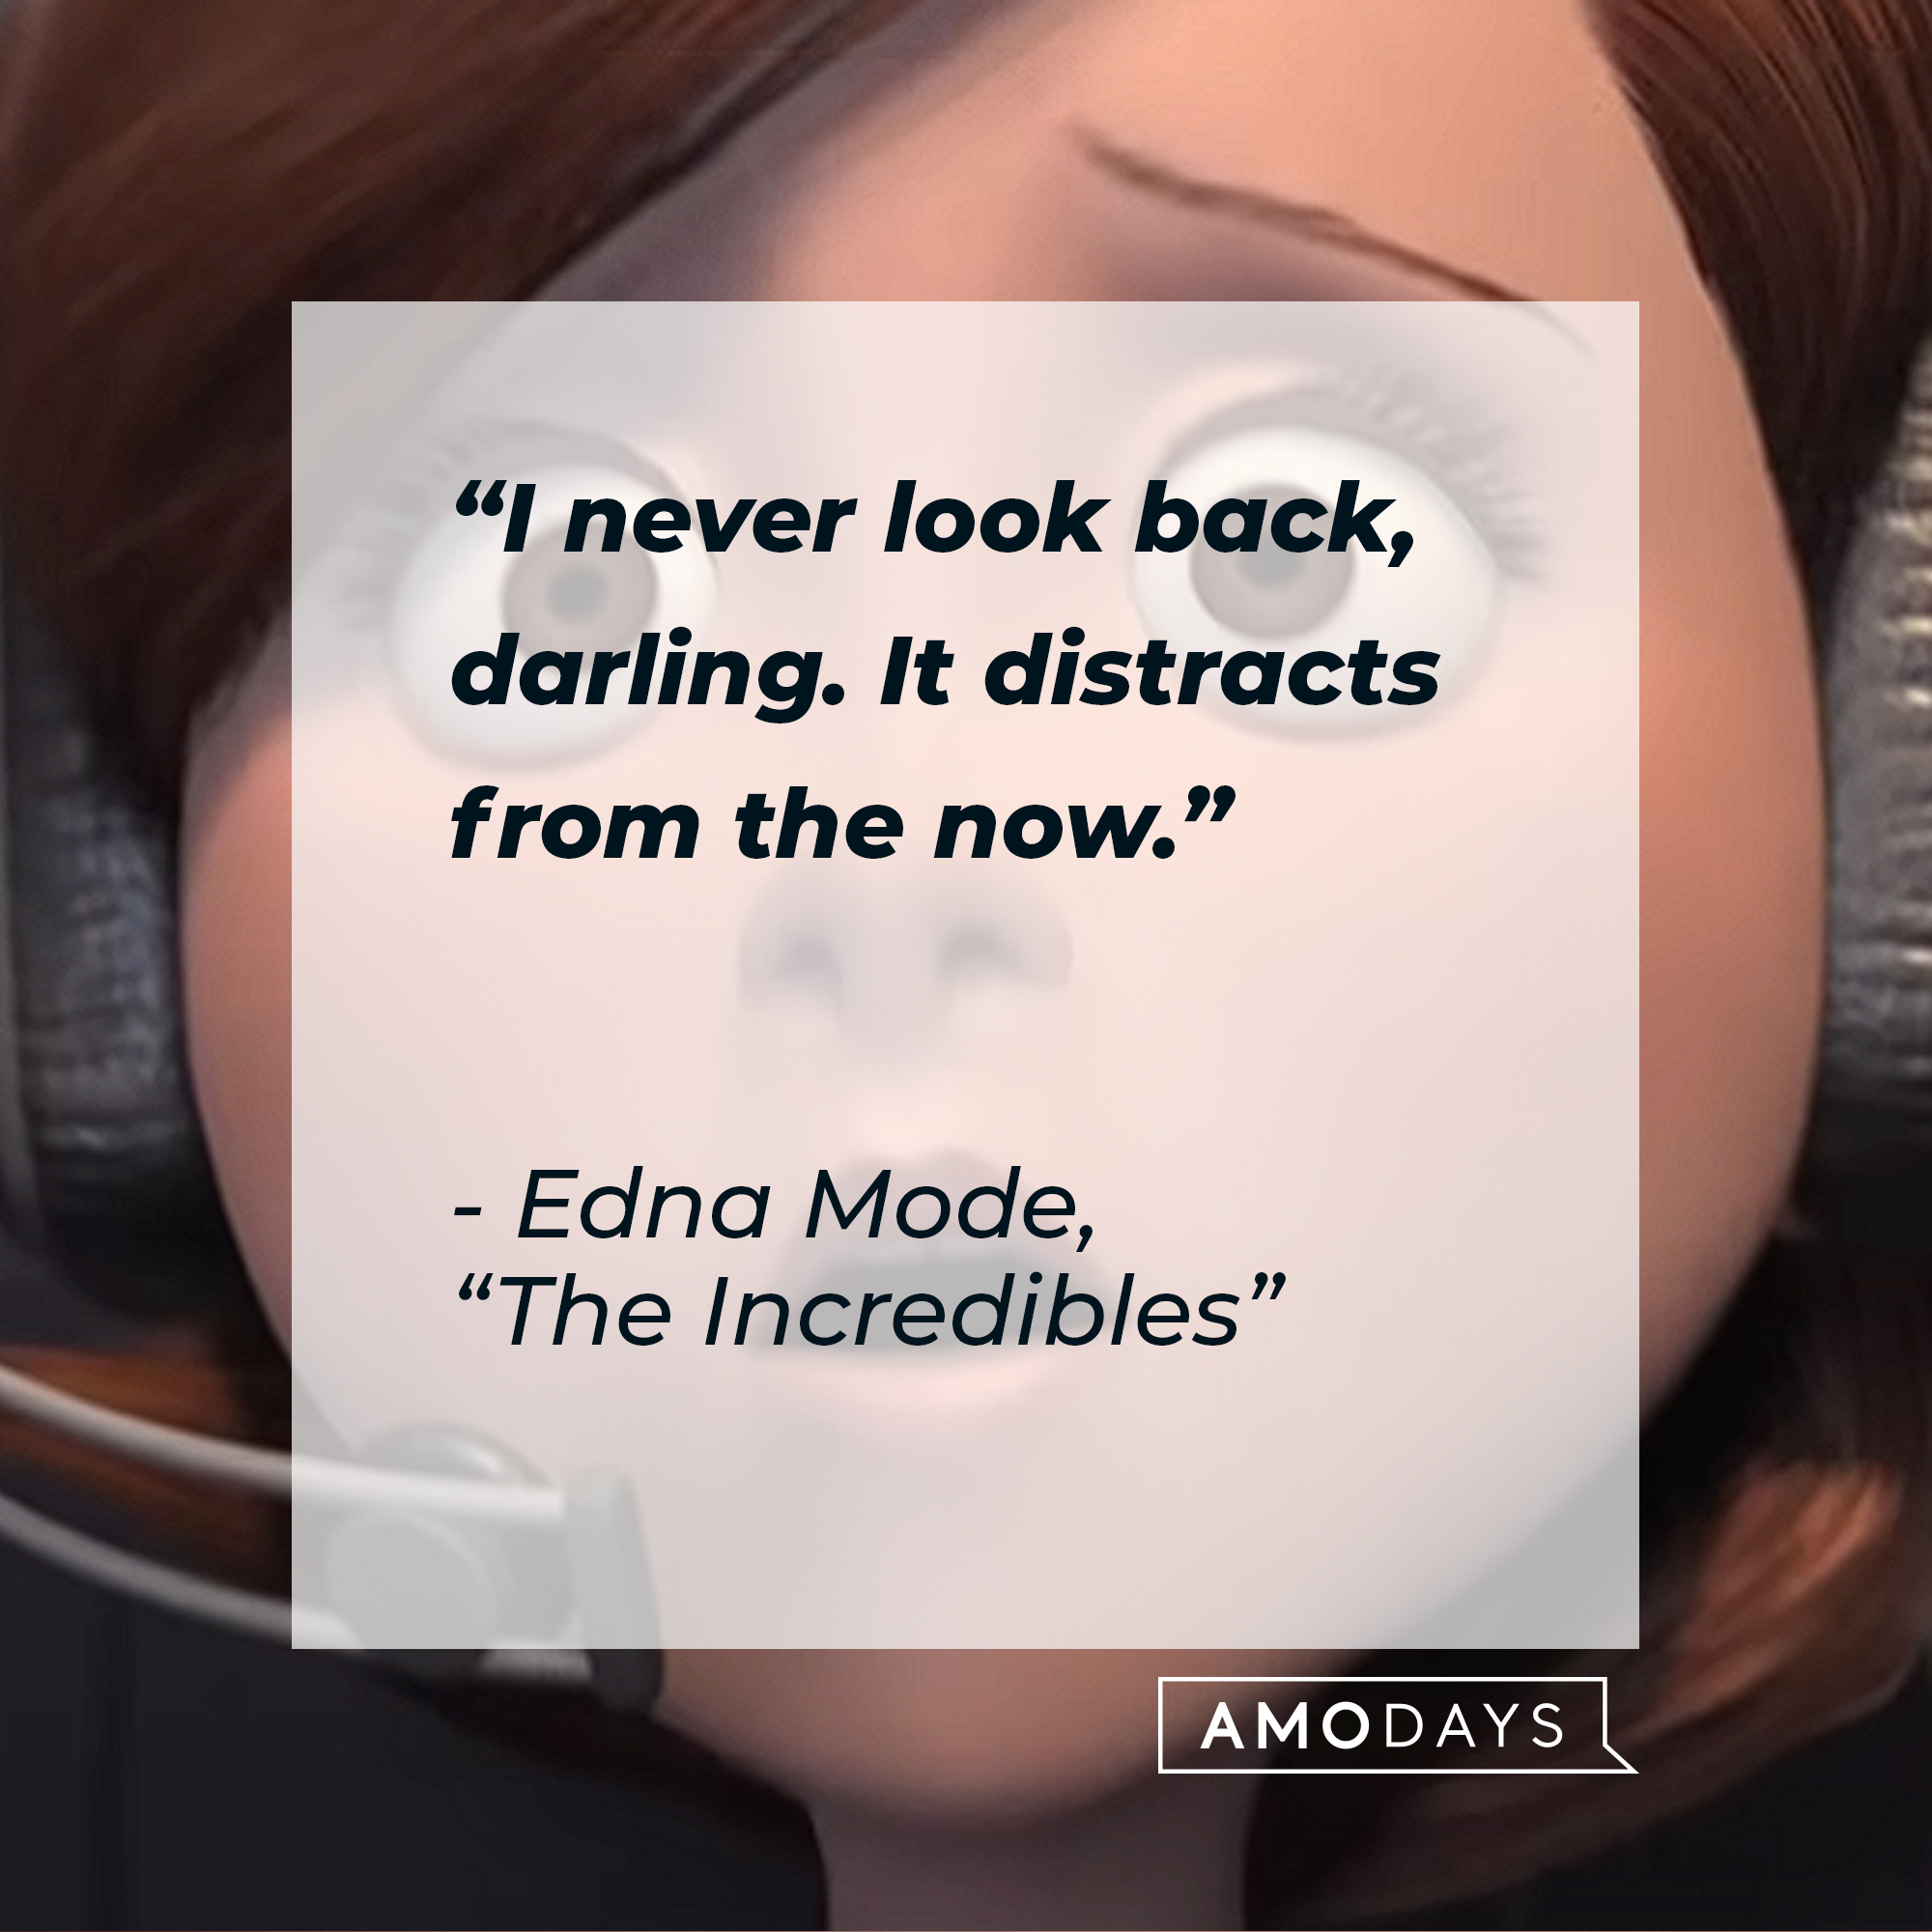 Edna Mode's "The Incredibles" quote: "I never look back, darling. It distracts from the now." | Source: Youtube.com/pixar